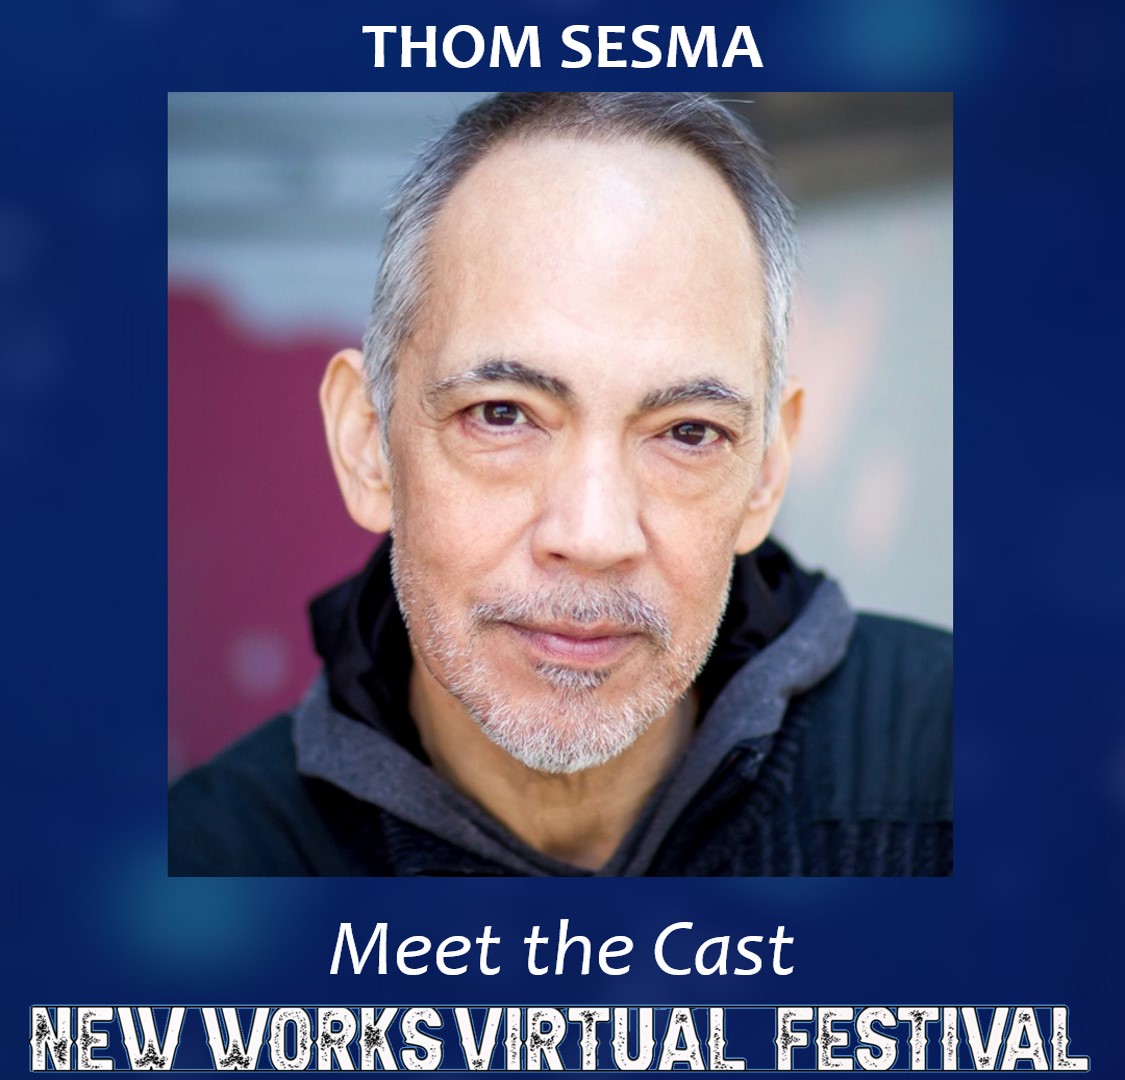 Meet @ThomSesmaNYC from the cast of 'Now You See It, Now You Don't.' by Mike Gingerella! Stay tuned to learn more about the team of performers and creatives bringing this star-studded festival to life. #nwvfest #newworksvirtualfestival #meethecast